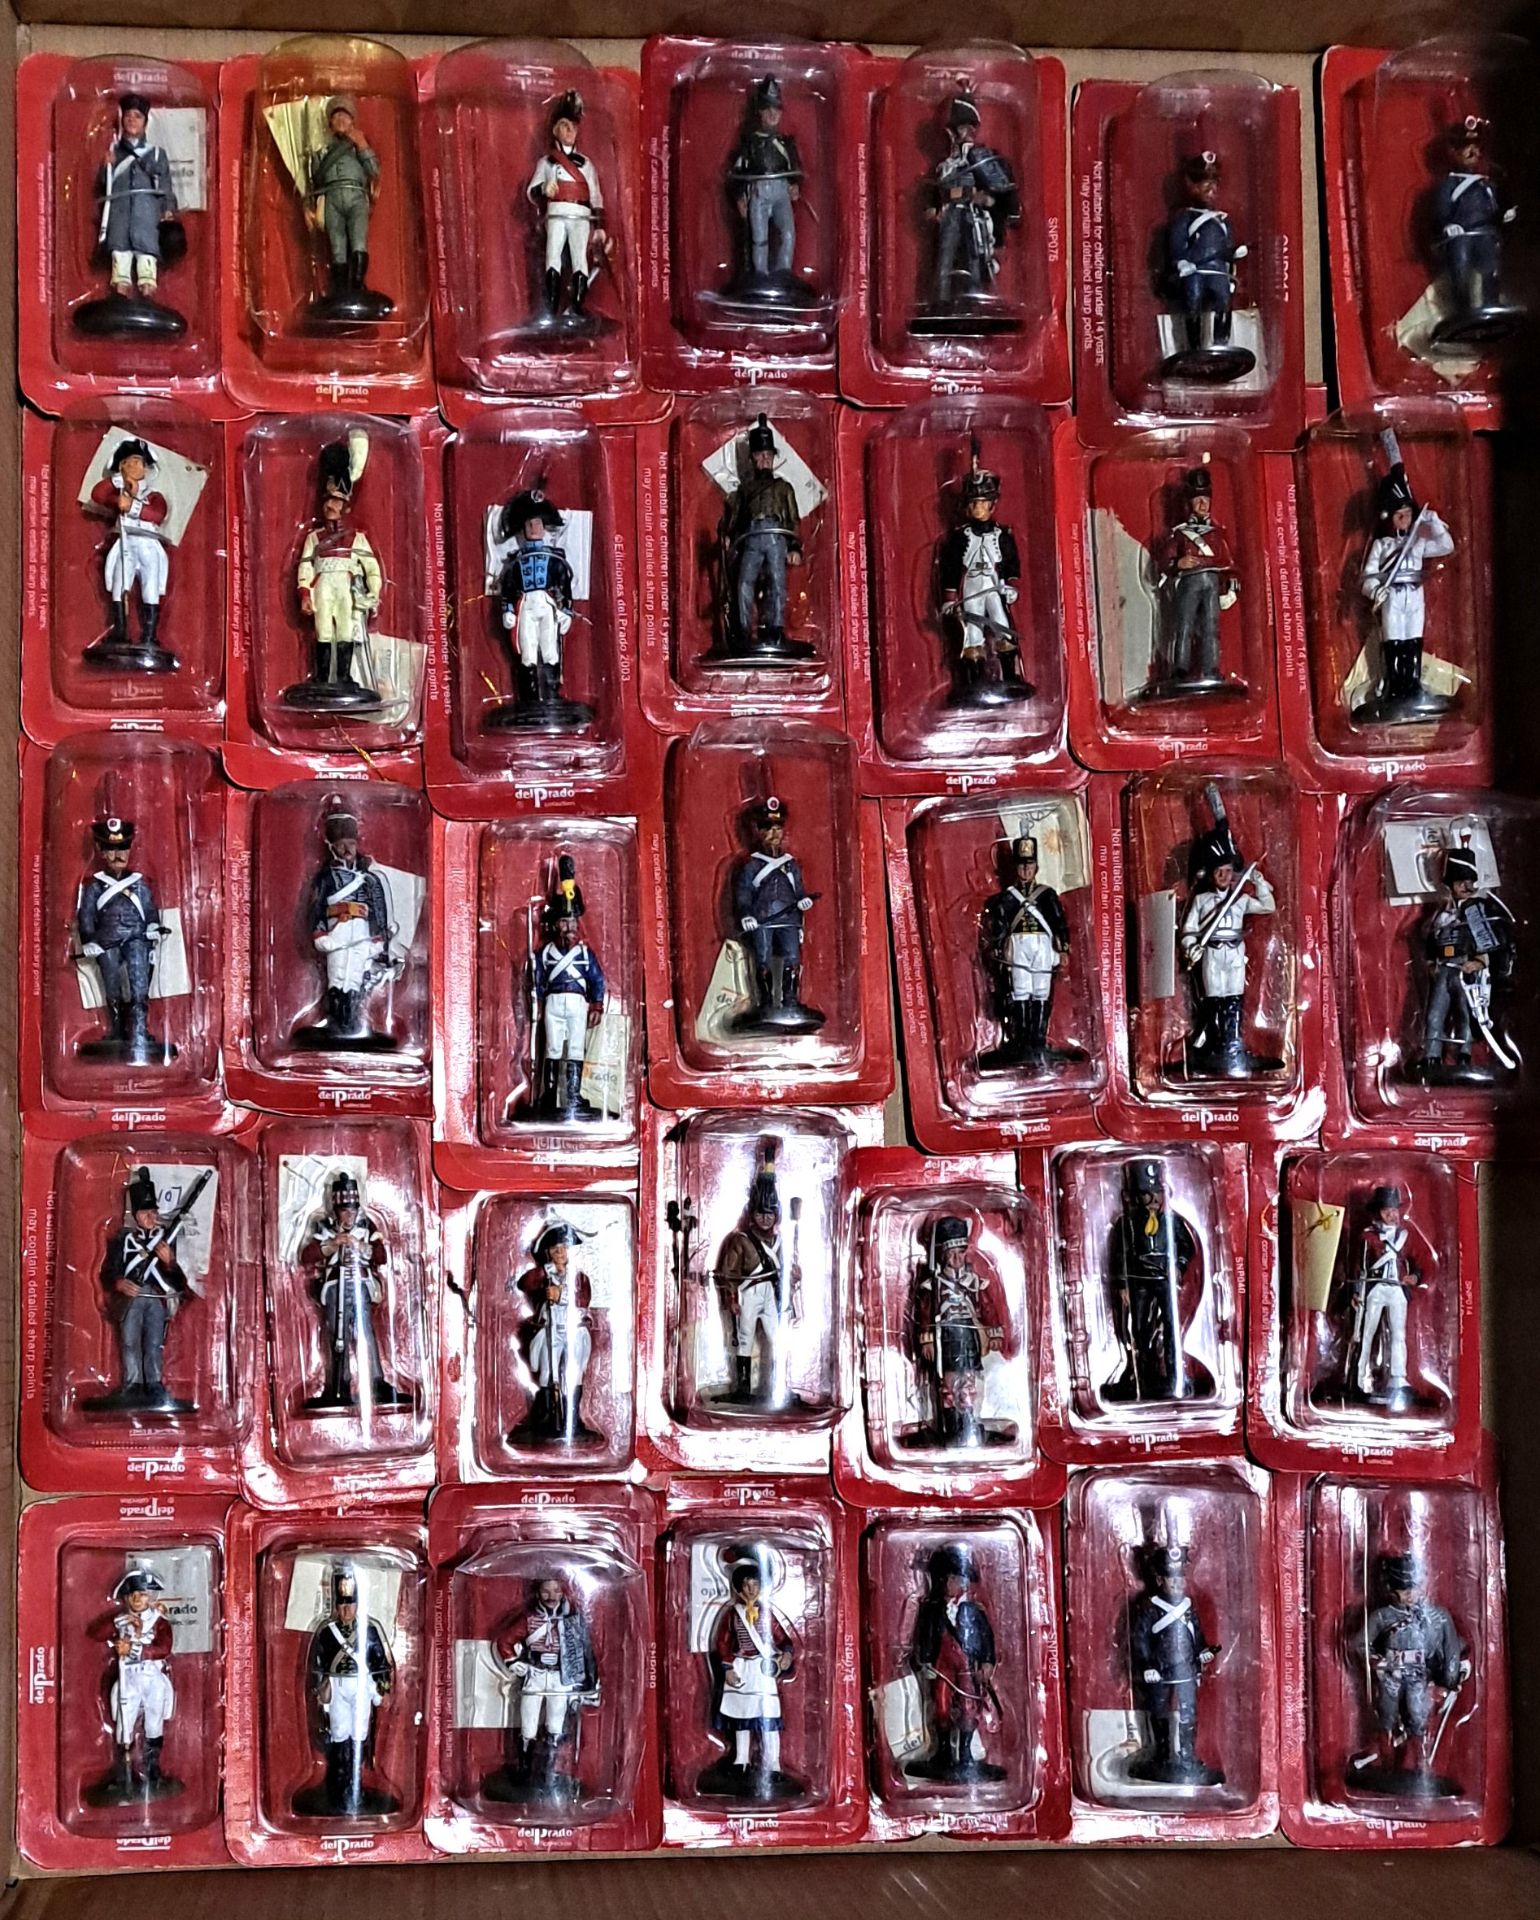 Del Prado, a group of carded/blister packed Military Figures